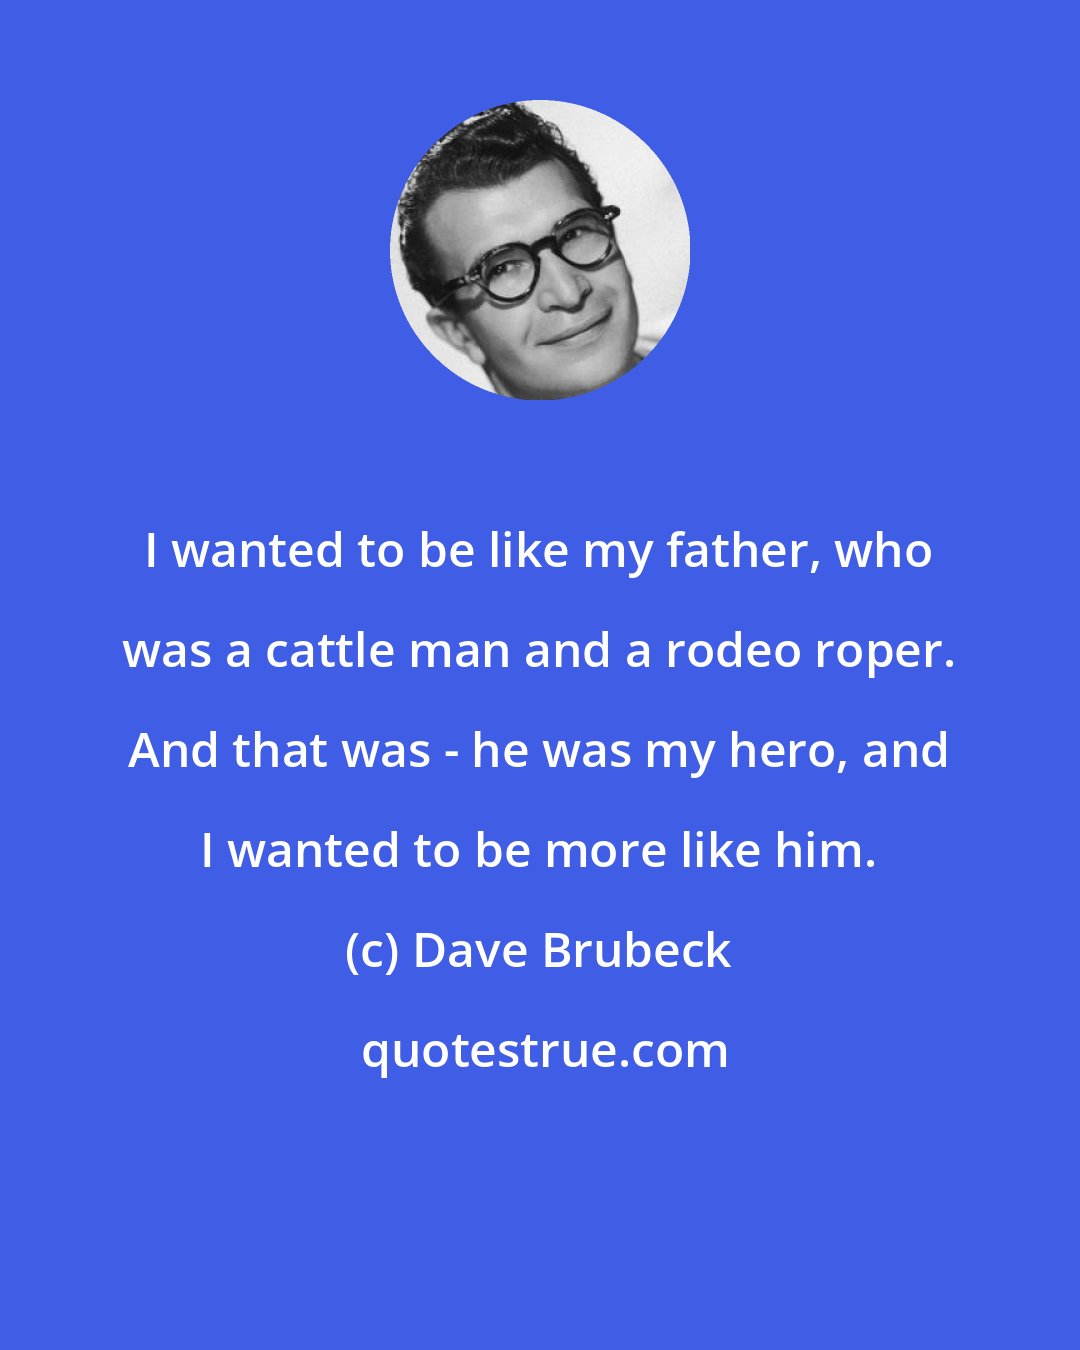 Dave Brubeck: I wanted to be like my father, who was a cattle man and a rodeo roper. And that was - he was my hero, and I wanted to be more like him.